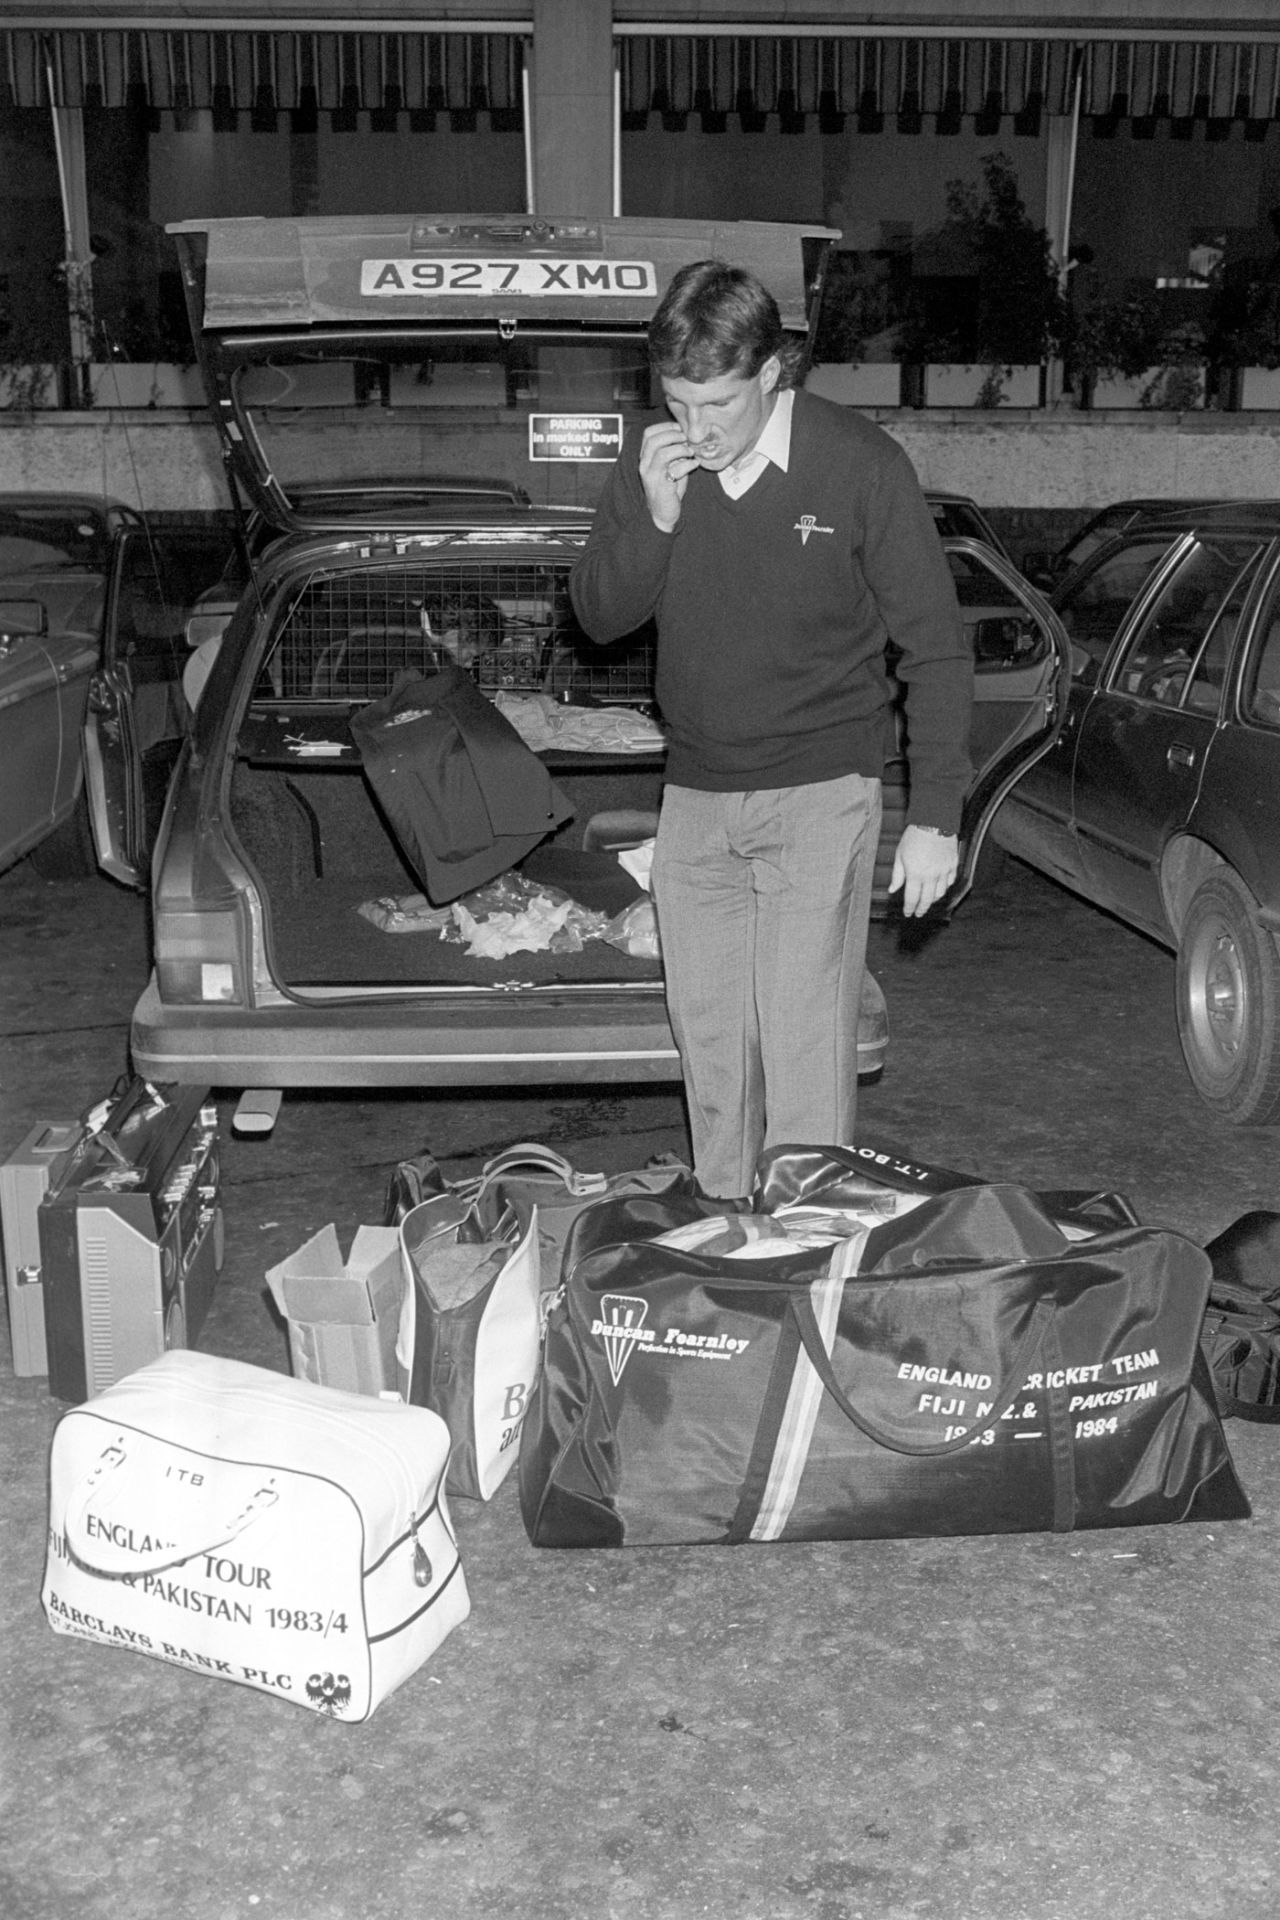 Ian Botham wonders how to put all his luggage into the car before departing on England's tour of Fiji, New Zealand and Pakistan, December 28, 1983